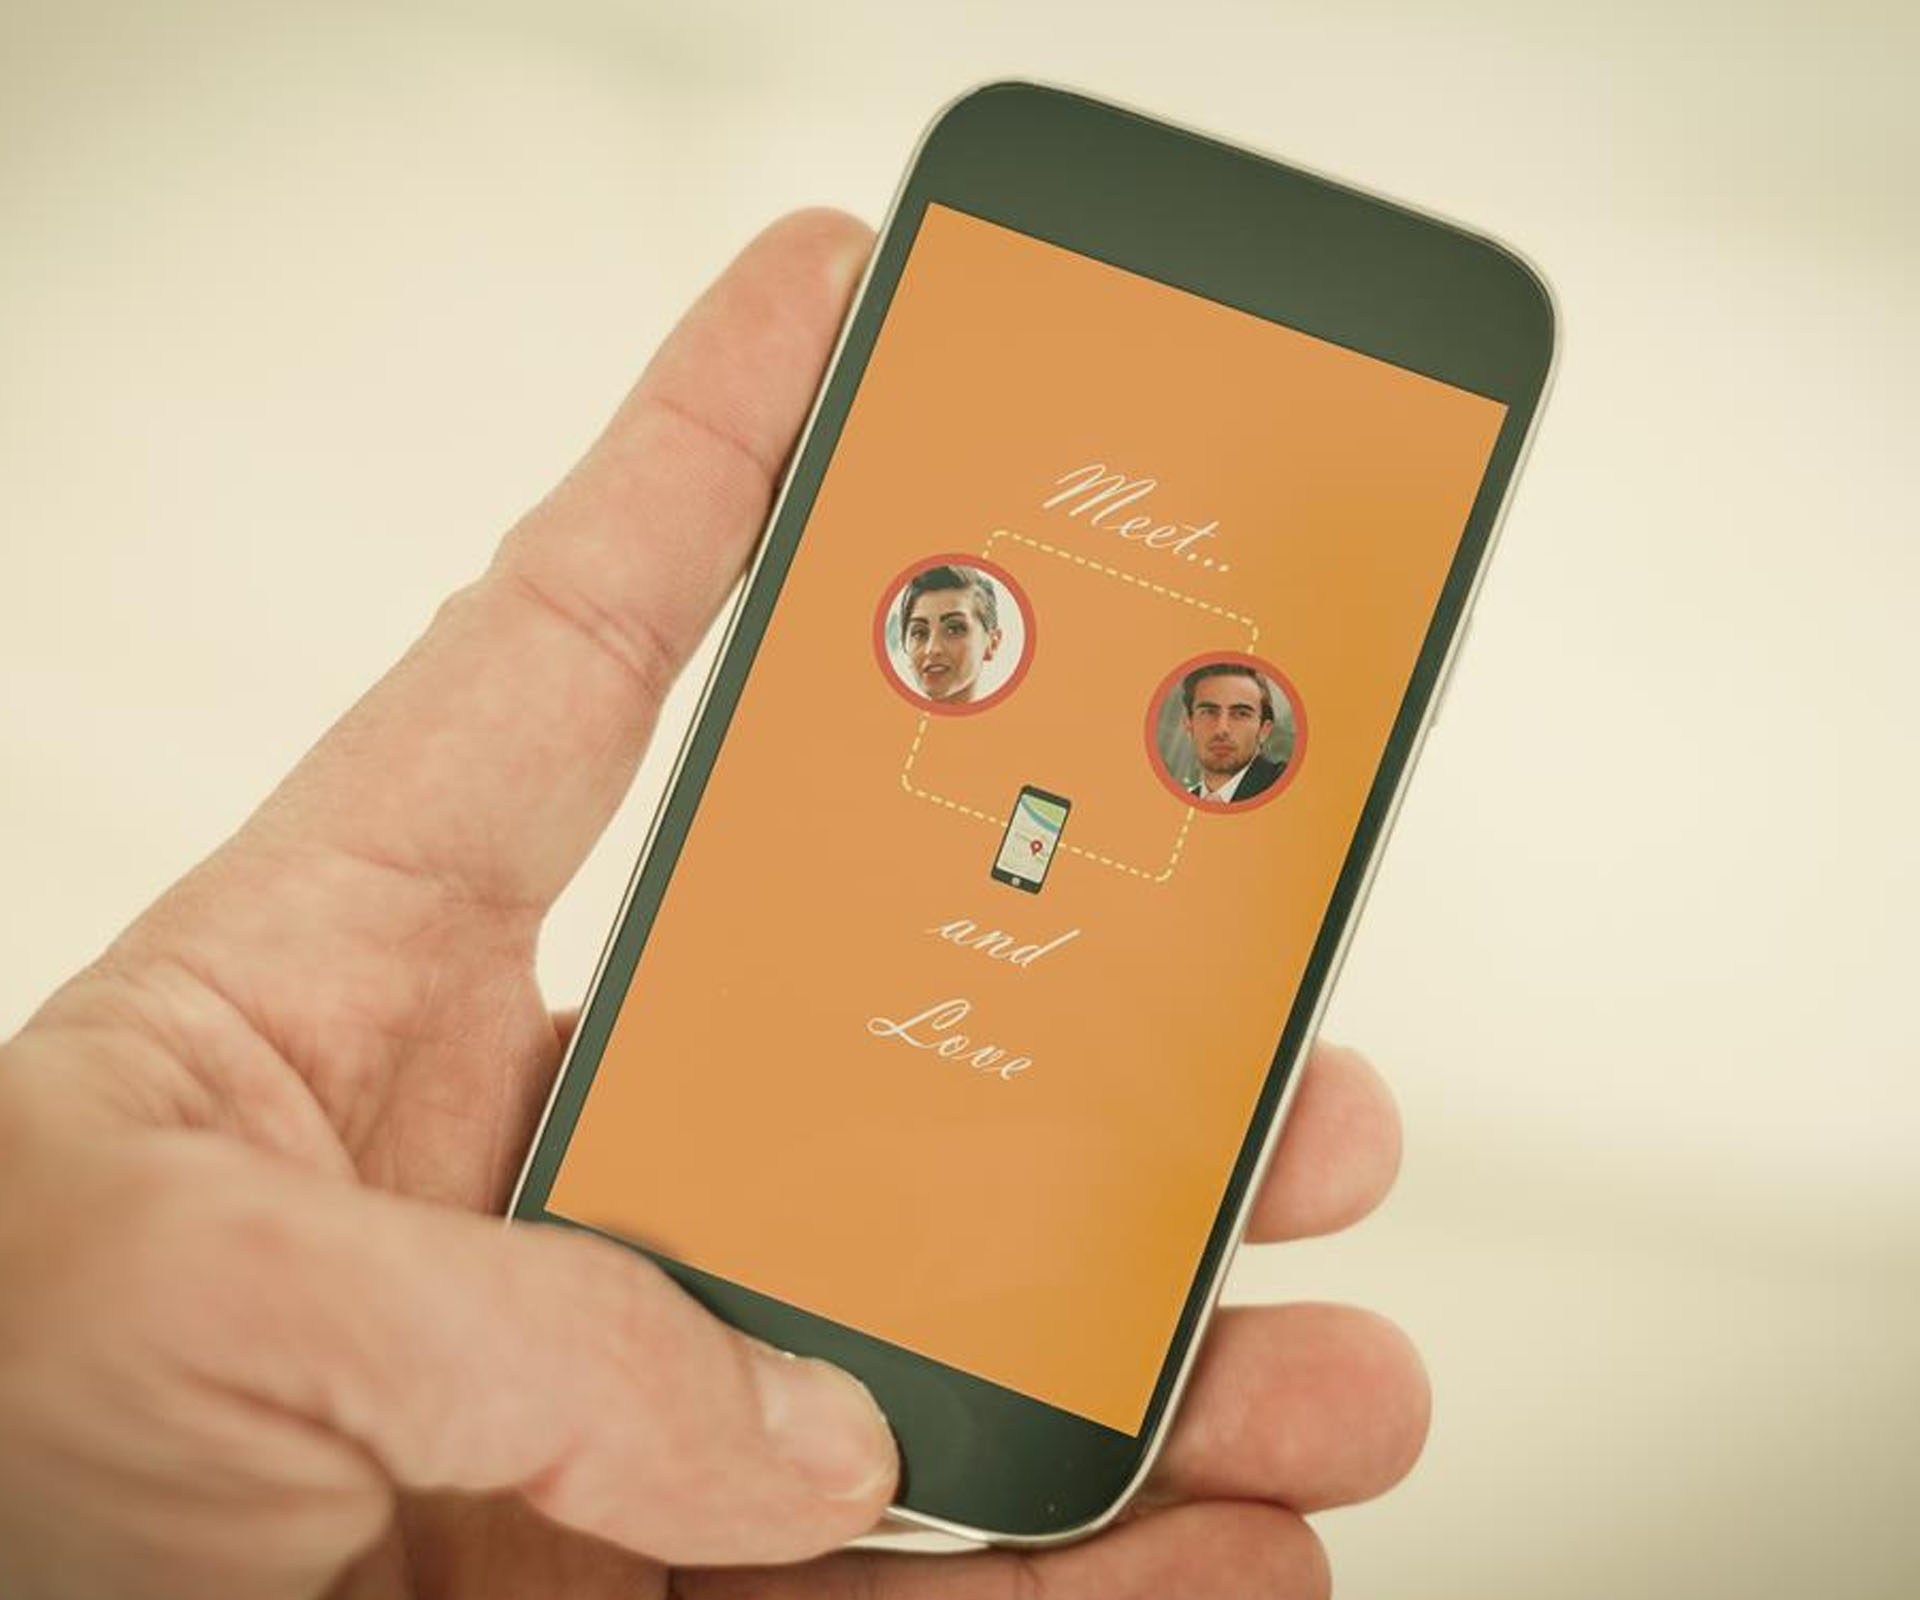 Mobile dating app Tinder reveals list of most right-swiped names